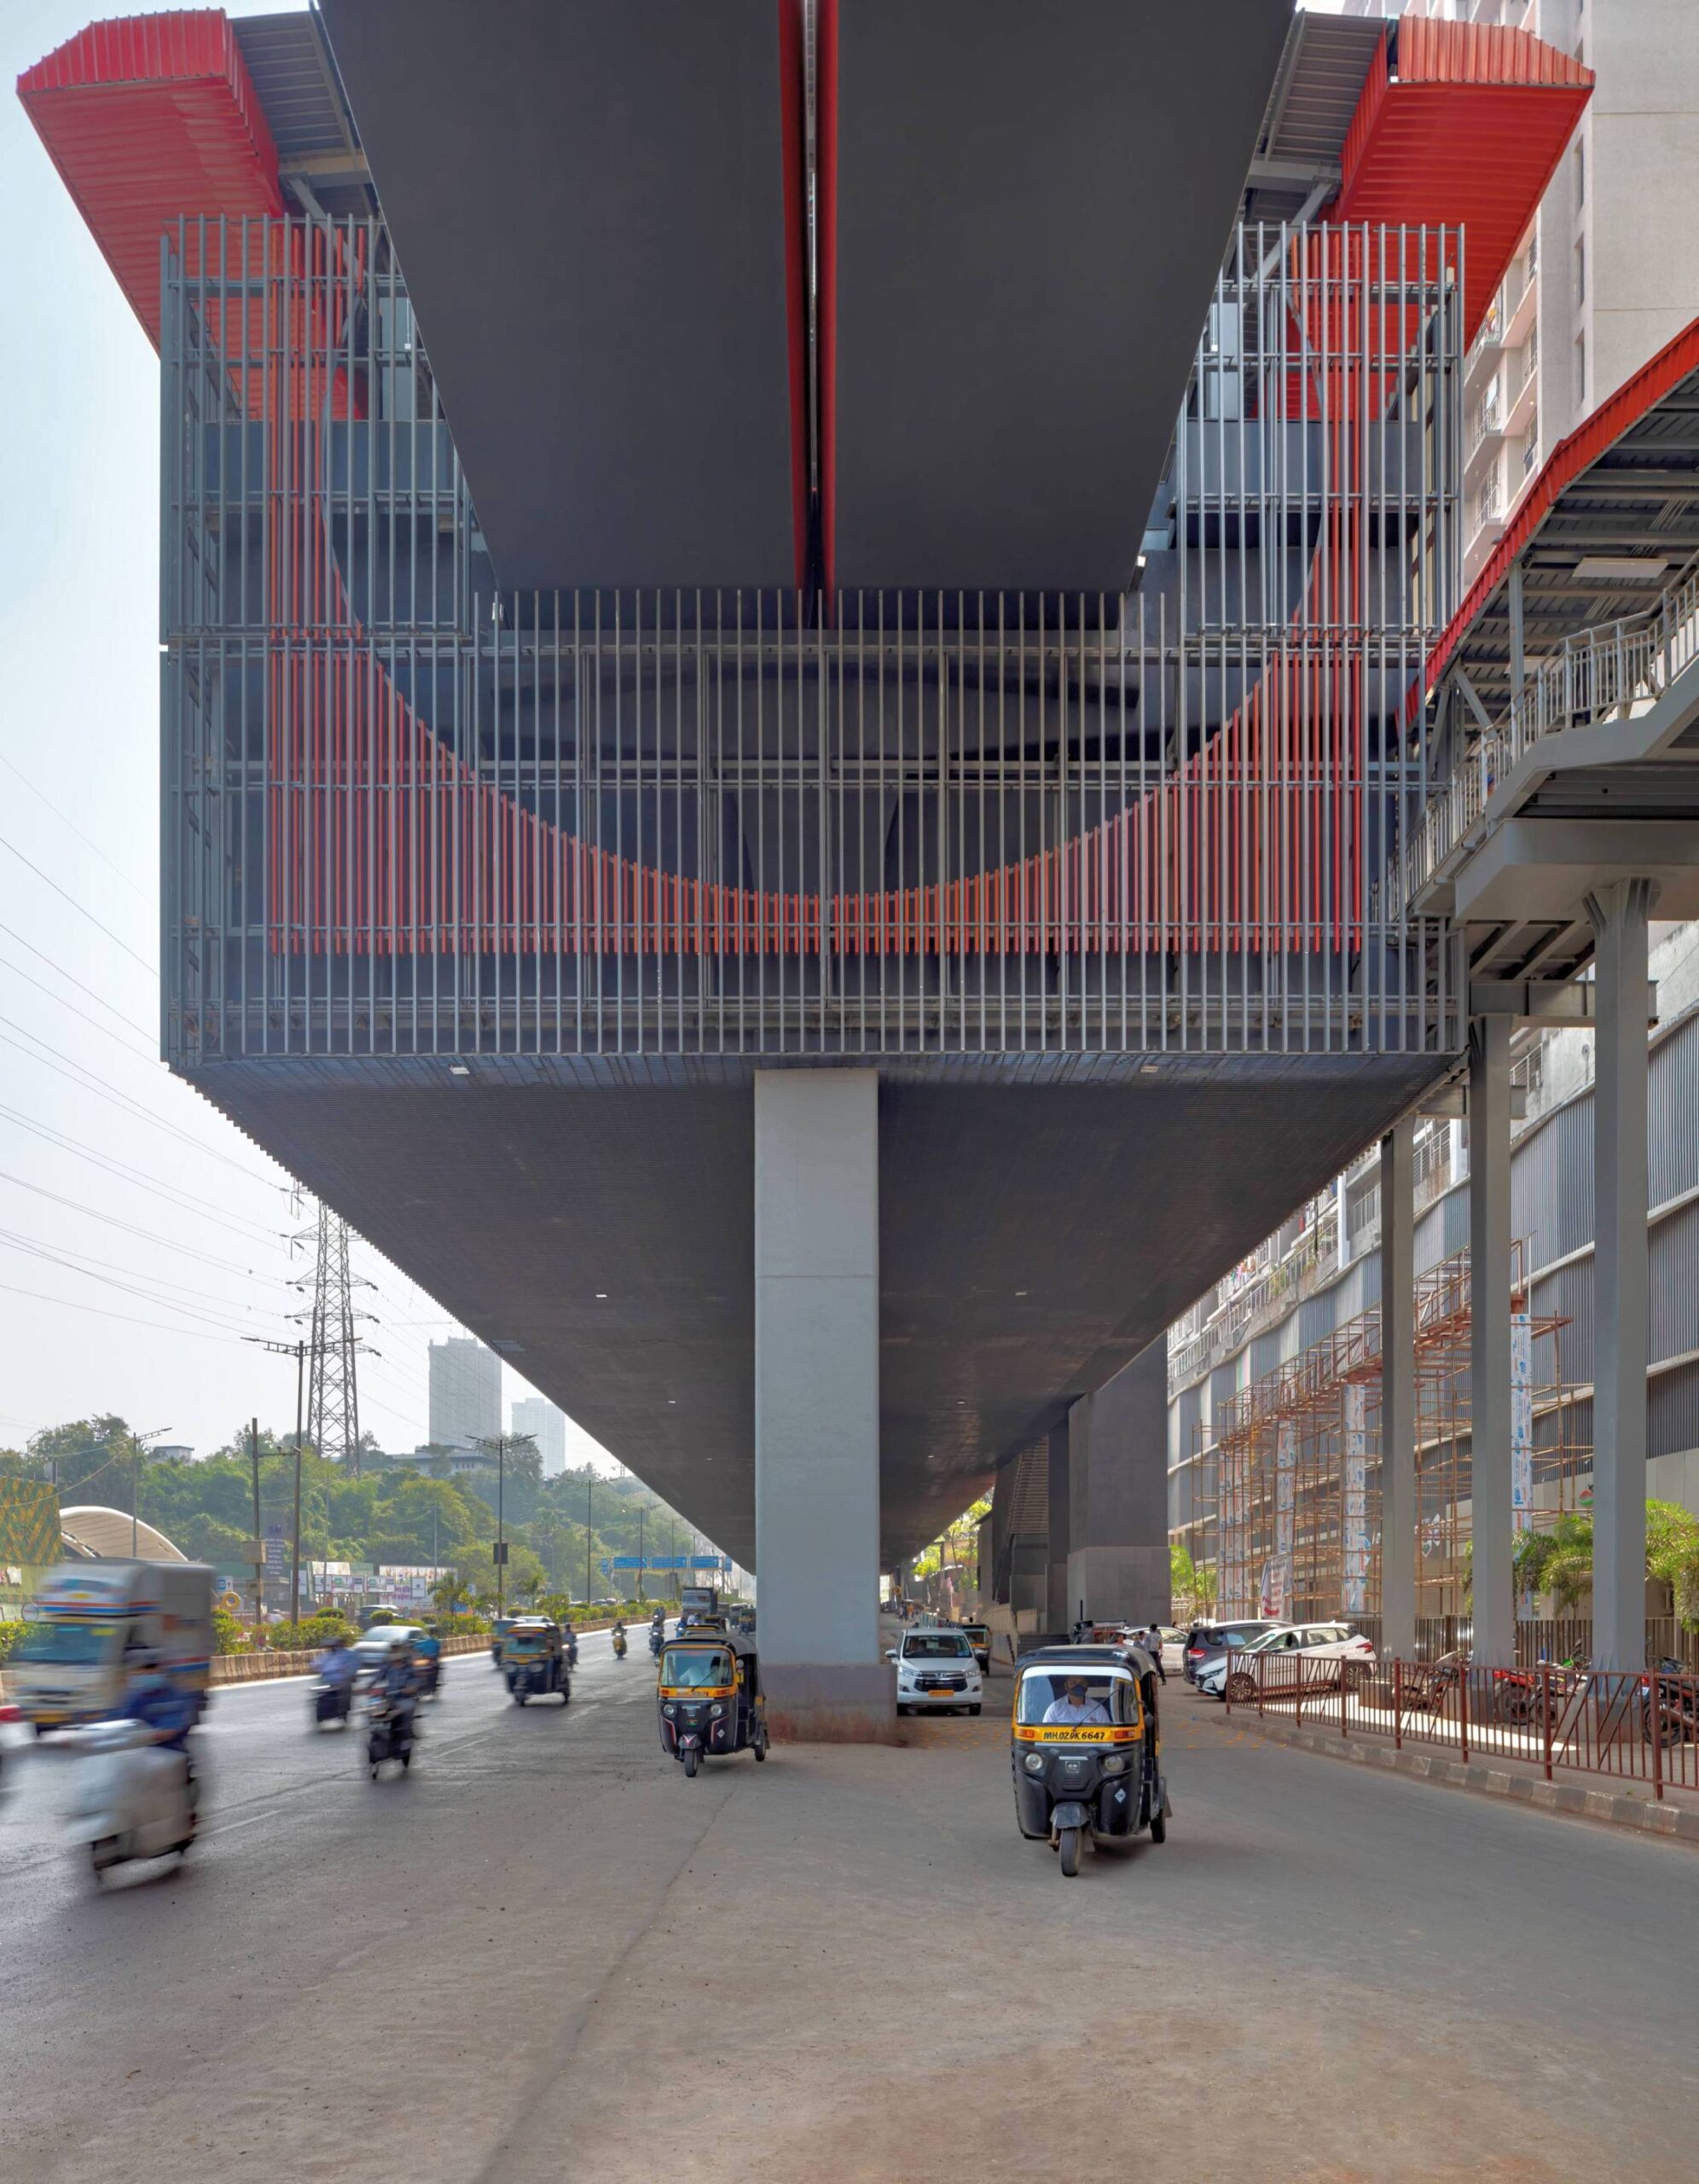 Mumbai Metro Stations-A case for Architects and Architecture-Sourabh Gupta, Archohm 77